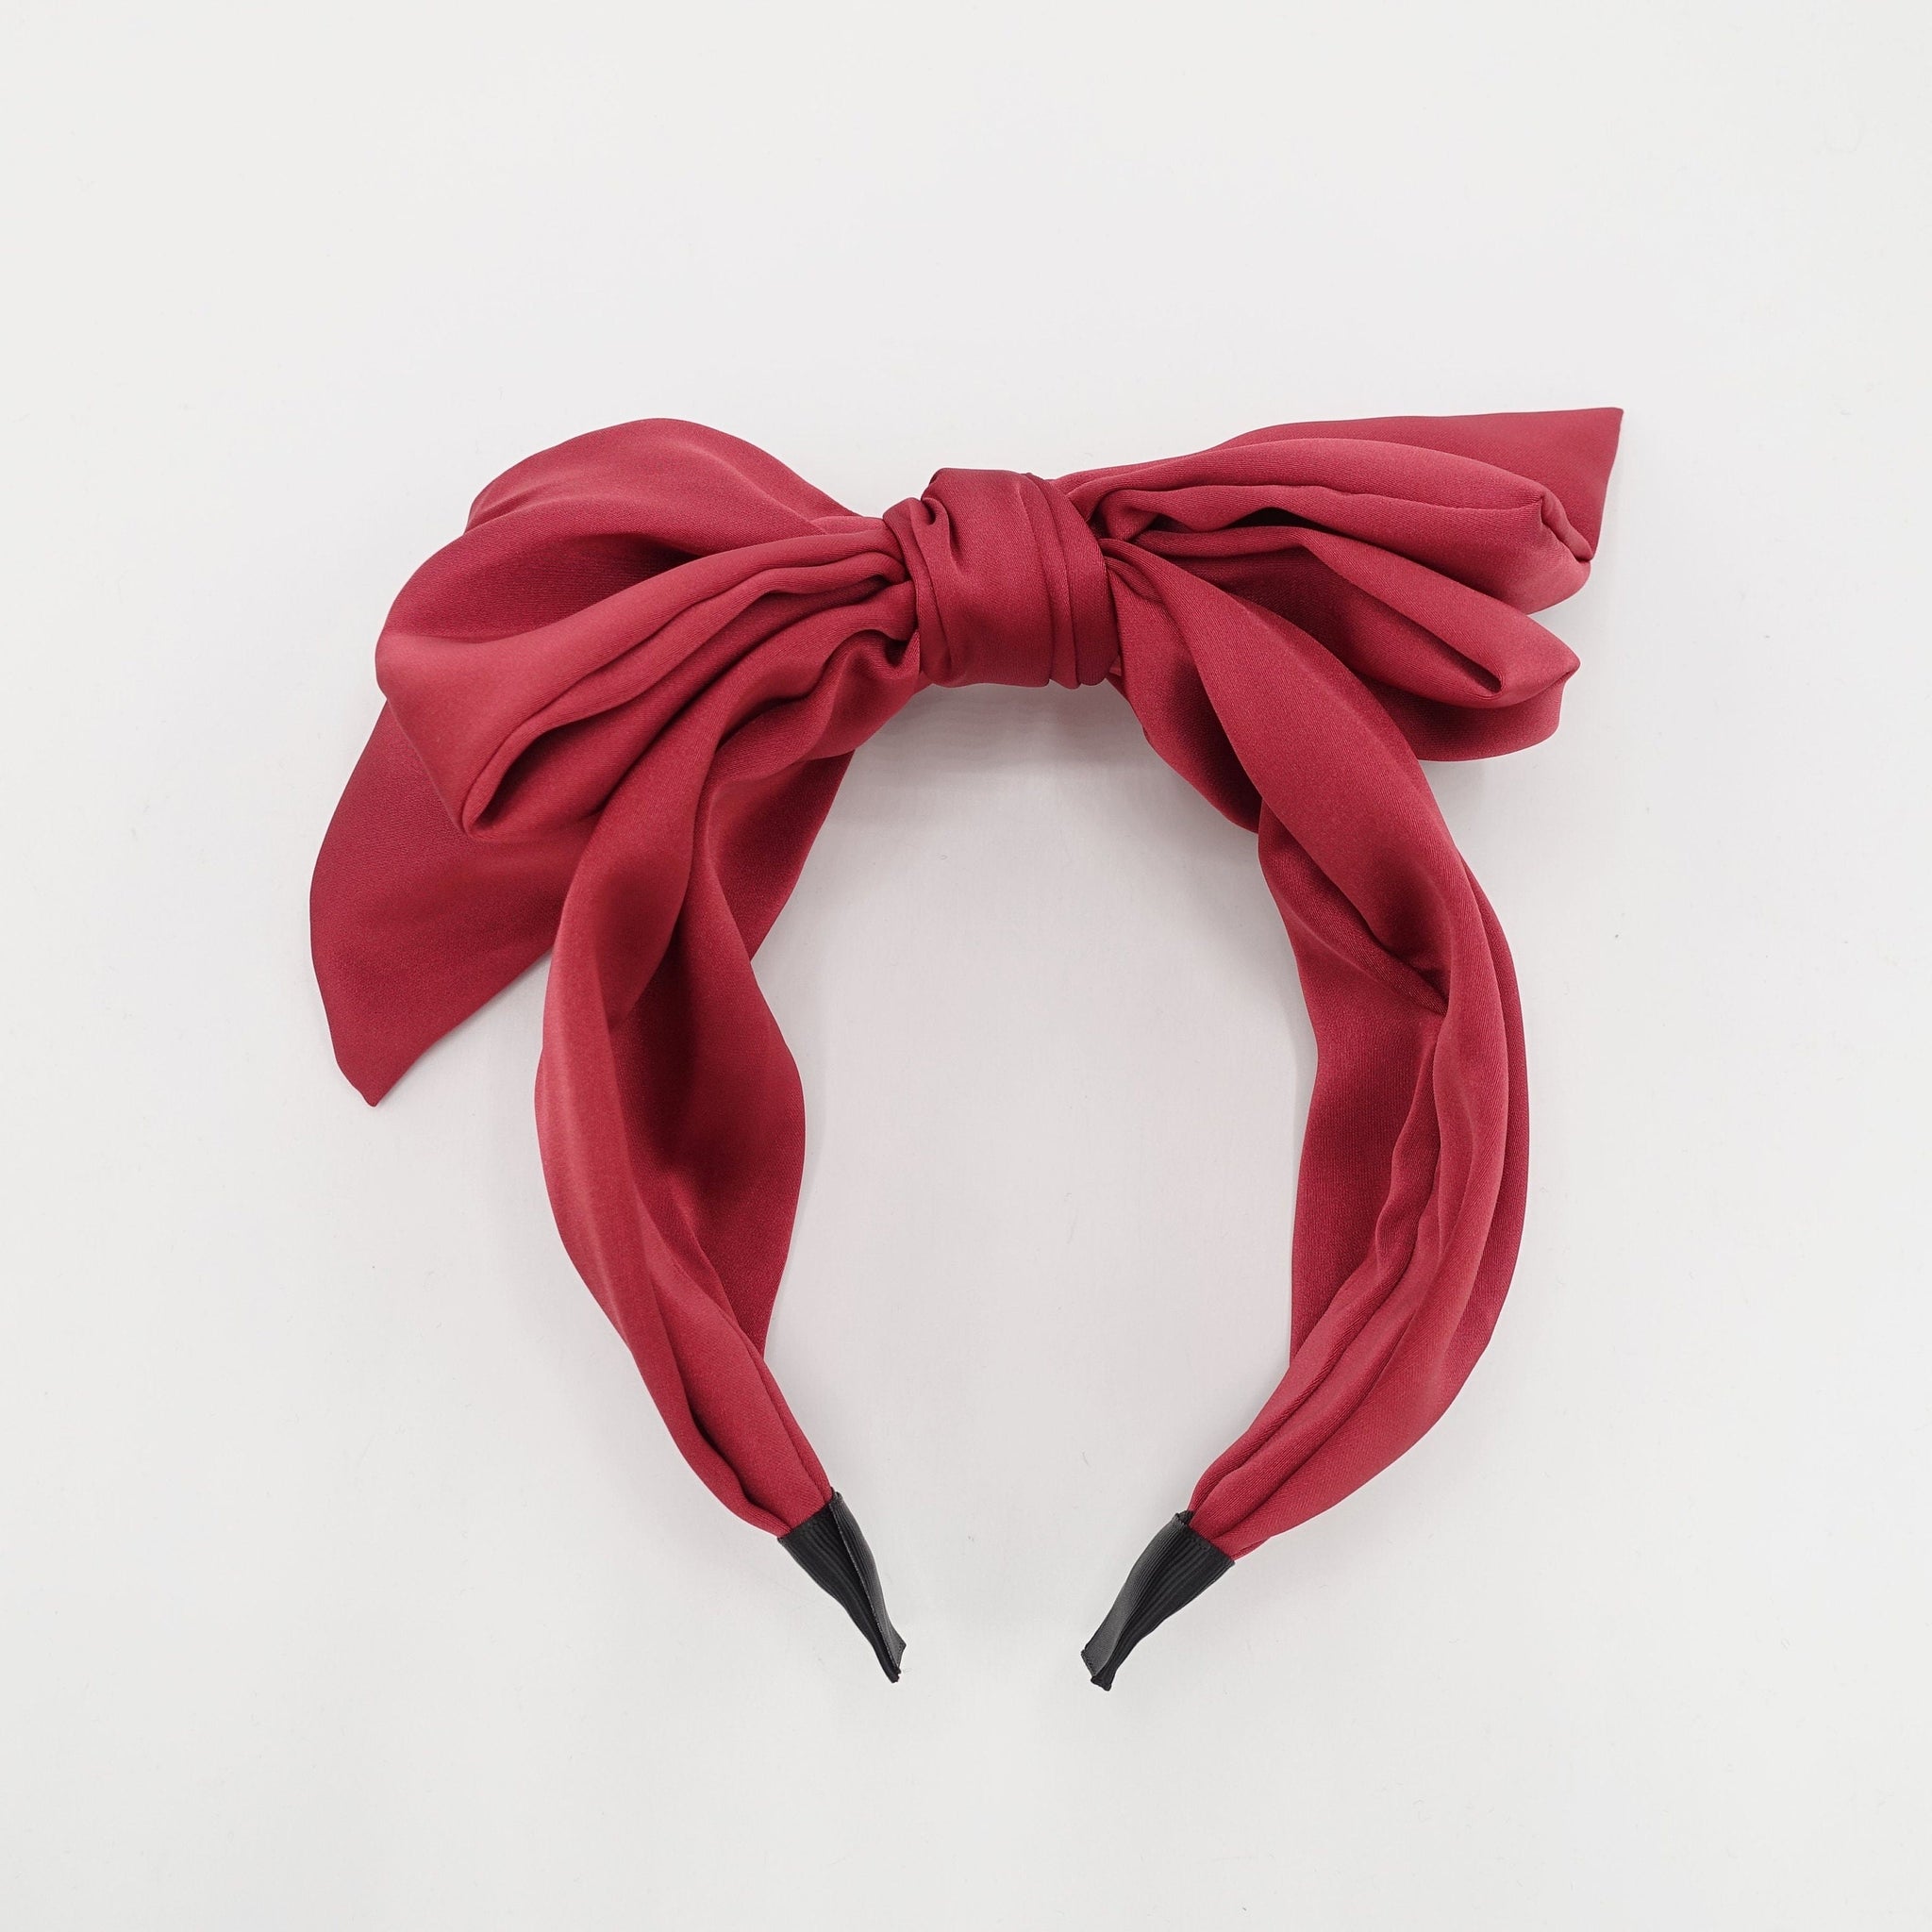 veryshine.com Hair Accessories Scarlet silk satin layered bow knot headband loose droopy hairband for women